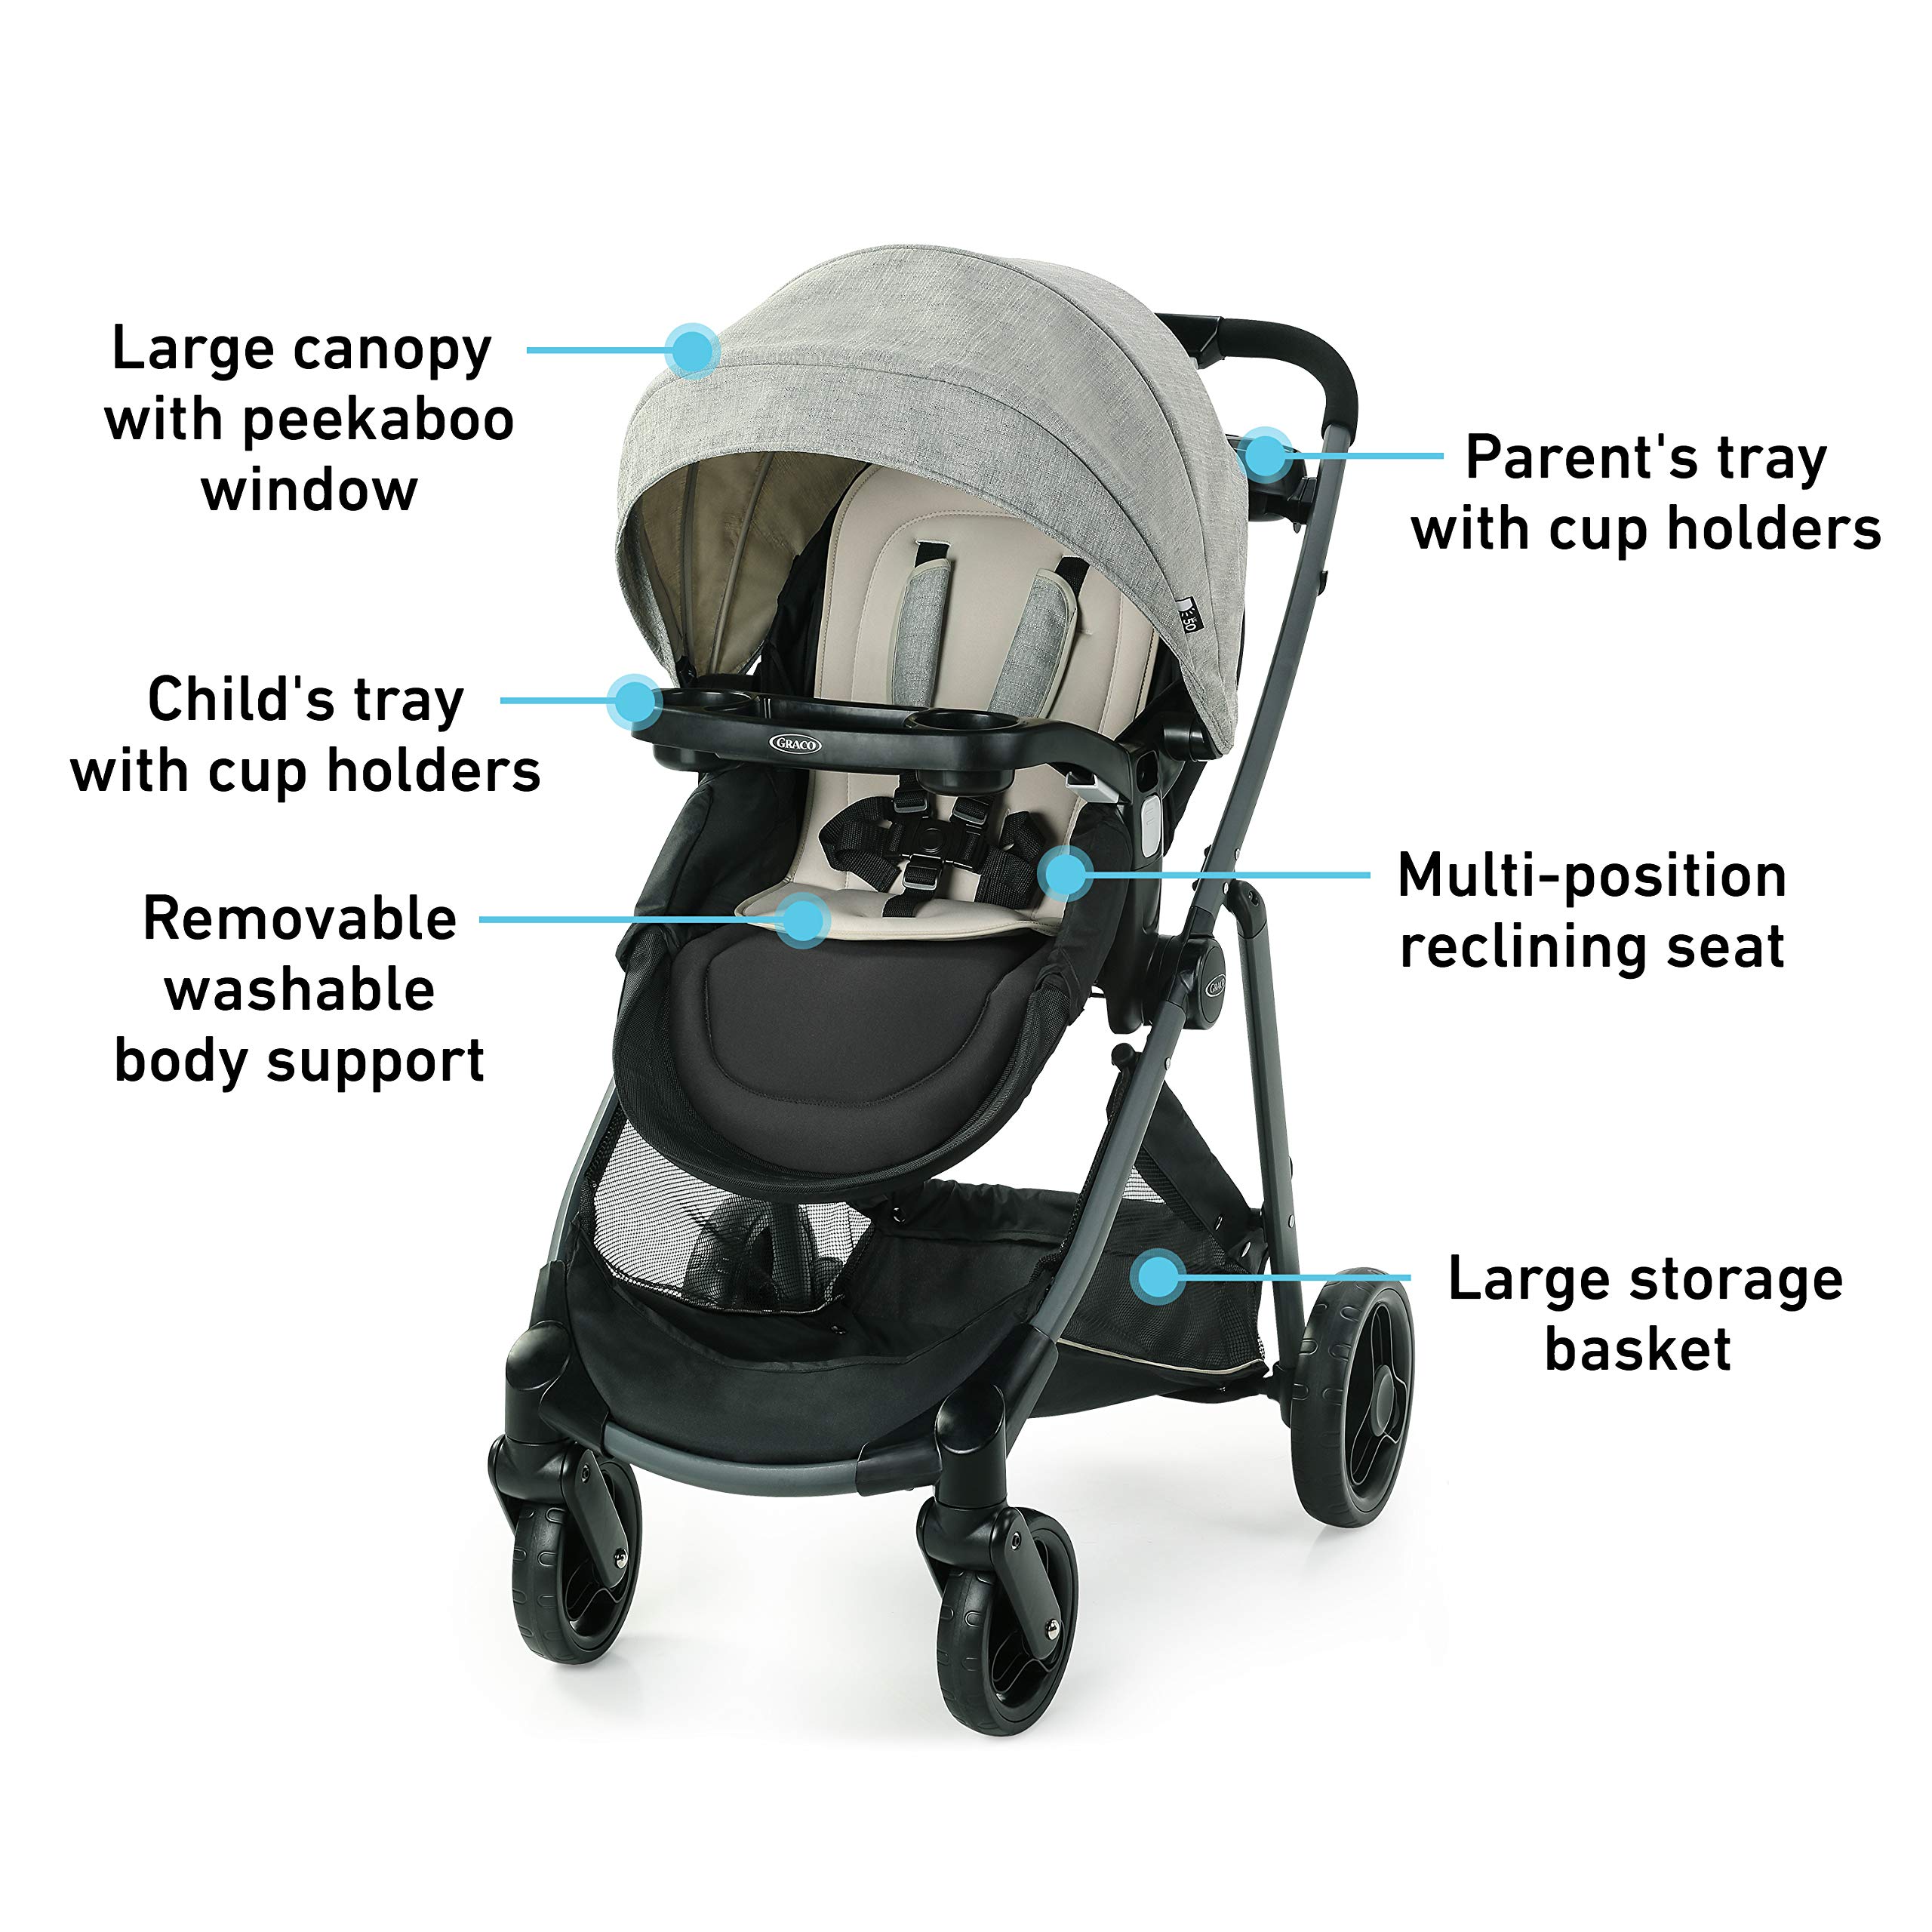 Graco Modes Element LX Travel System | Includes Baby Stroller with Reversible Seat, Extra Storage, Child Tray, One Hand Fold and SnugRide® 35 Lite LX Infant Car Seat, Lynwood